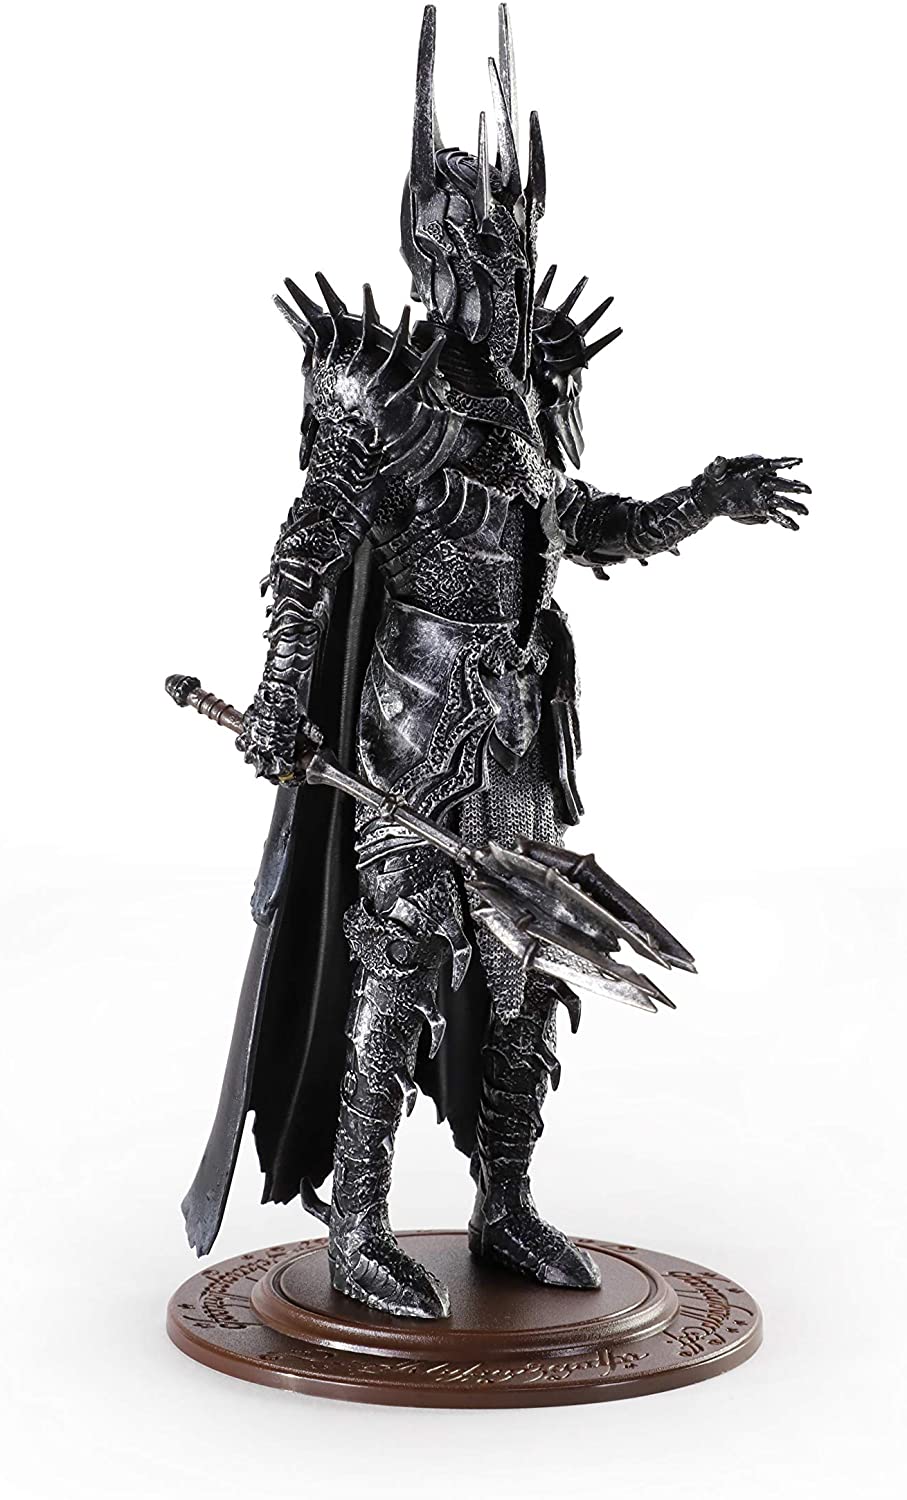 BendyFigs Lord of The Rings Sauron Oficial licenciado